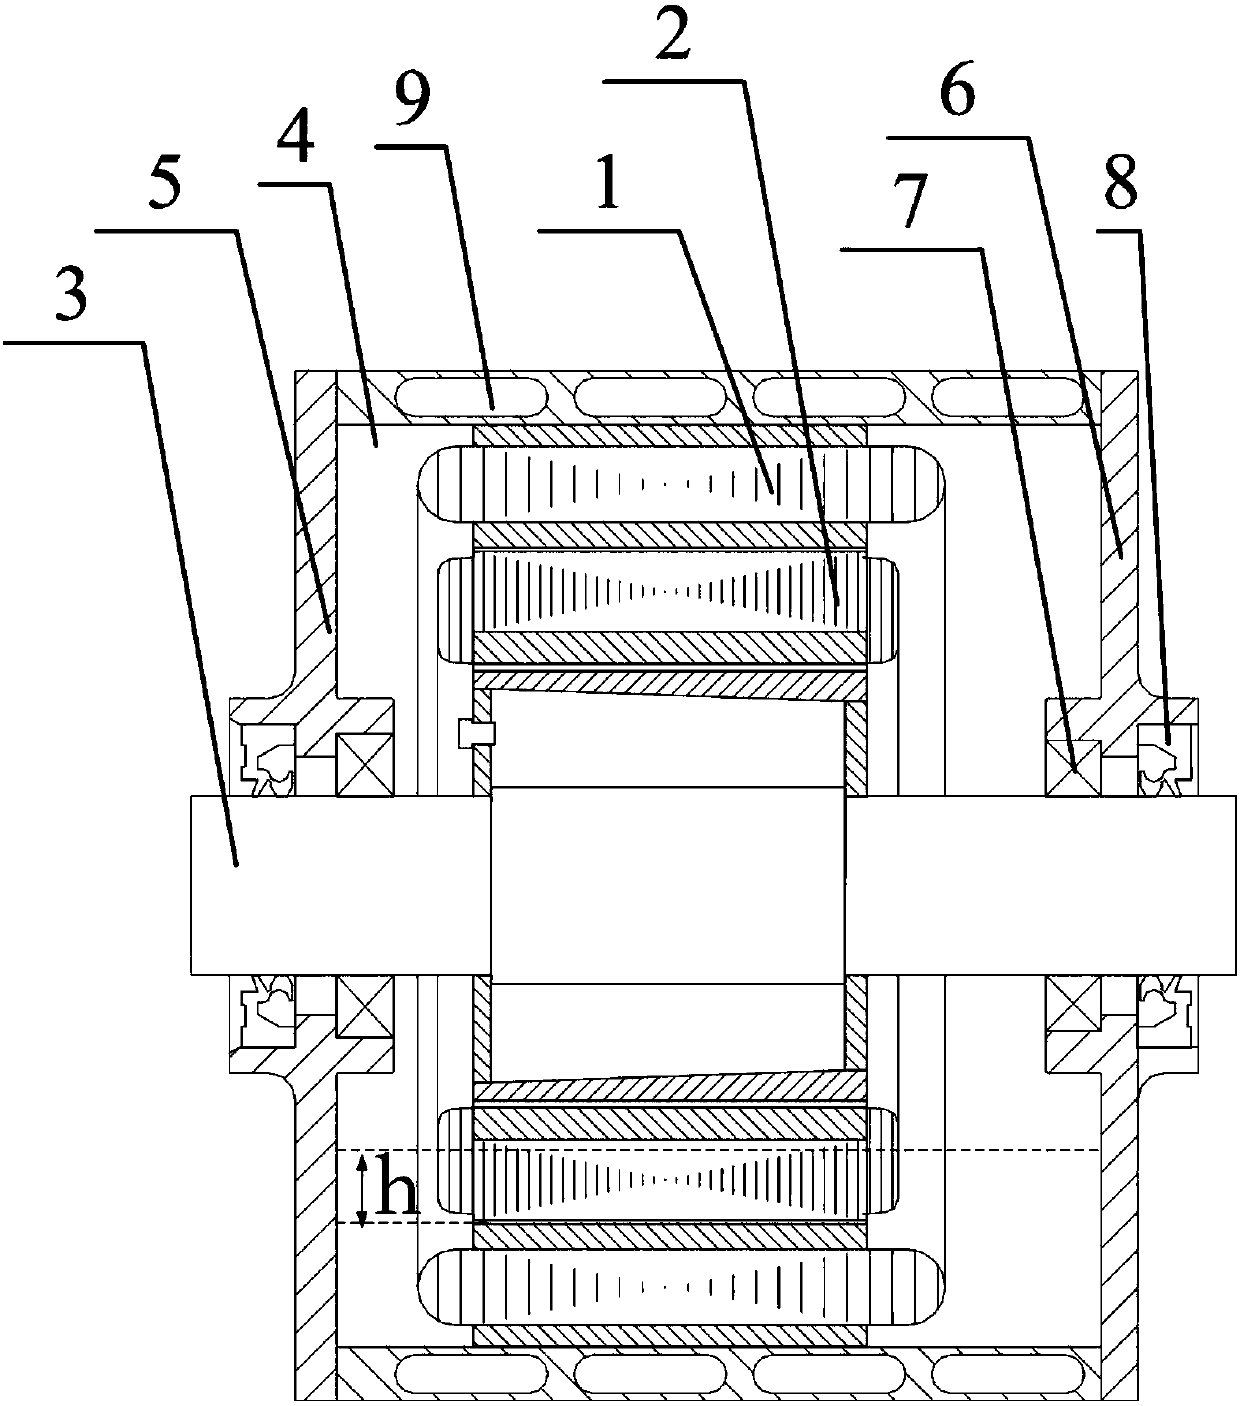 Motor bearing lubrication structure